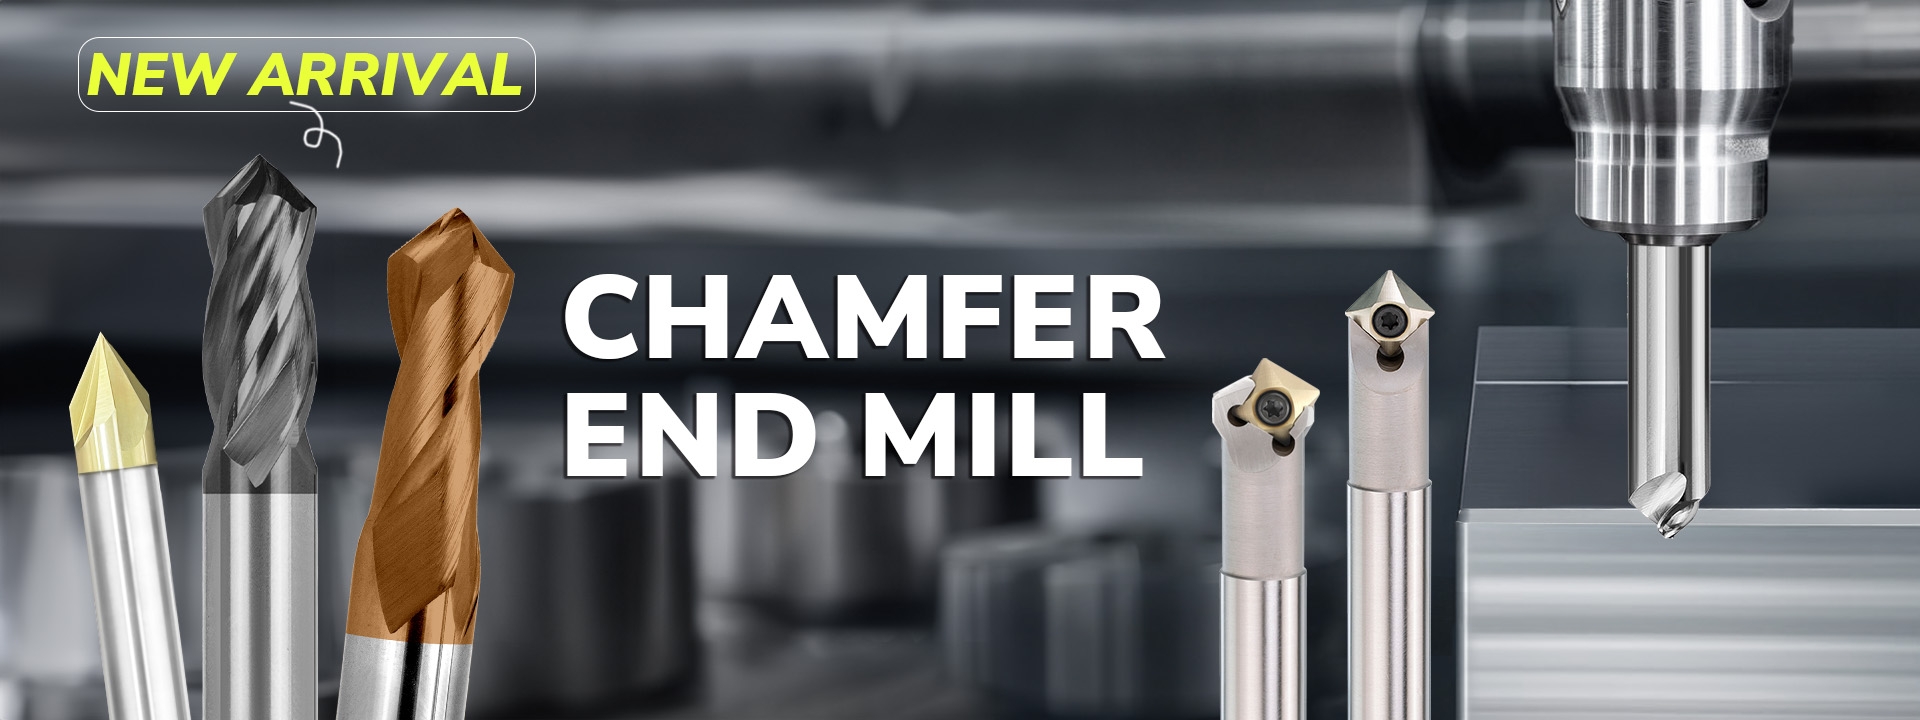 Chamfer End Mills for Chamfering